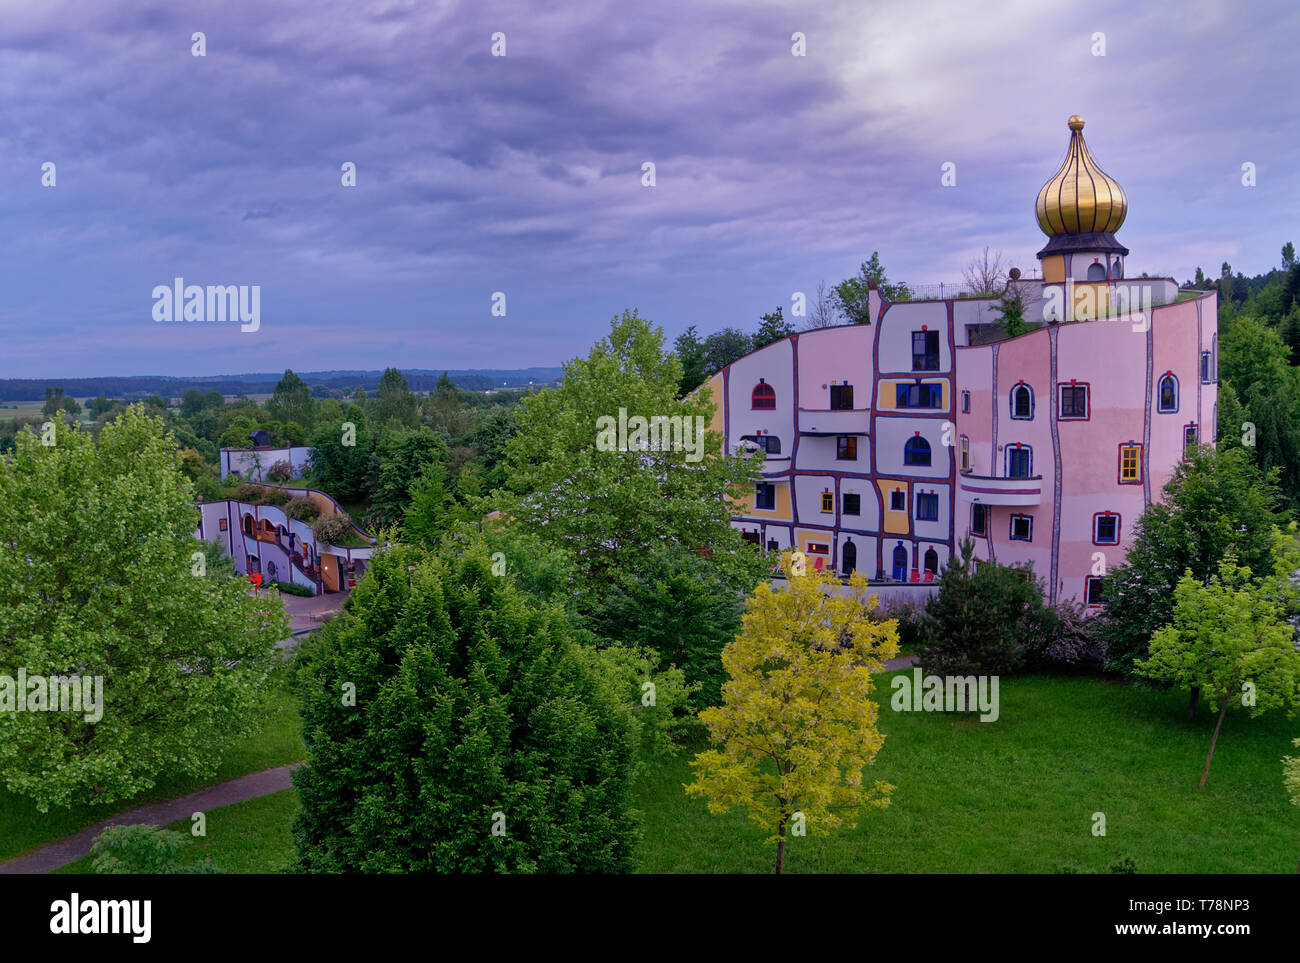 Looking down on the Stammhaus and its golden dome at Rogner Bad Blumau, Austria, a resort or spa hotel designed by Friedensreich Hundertwasser Stock Photo